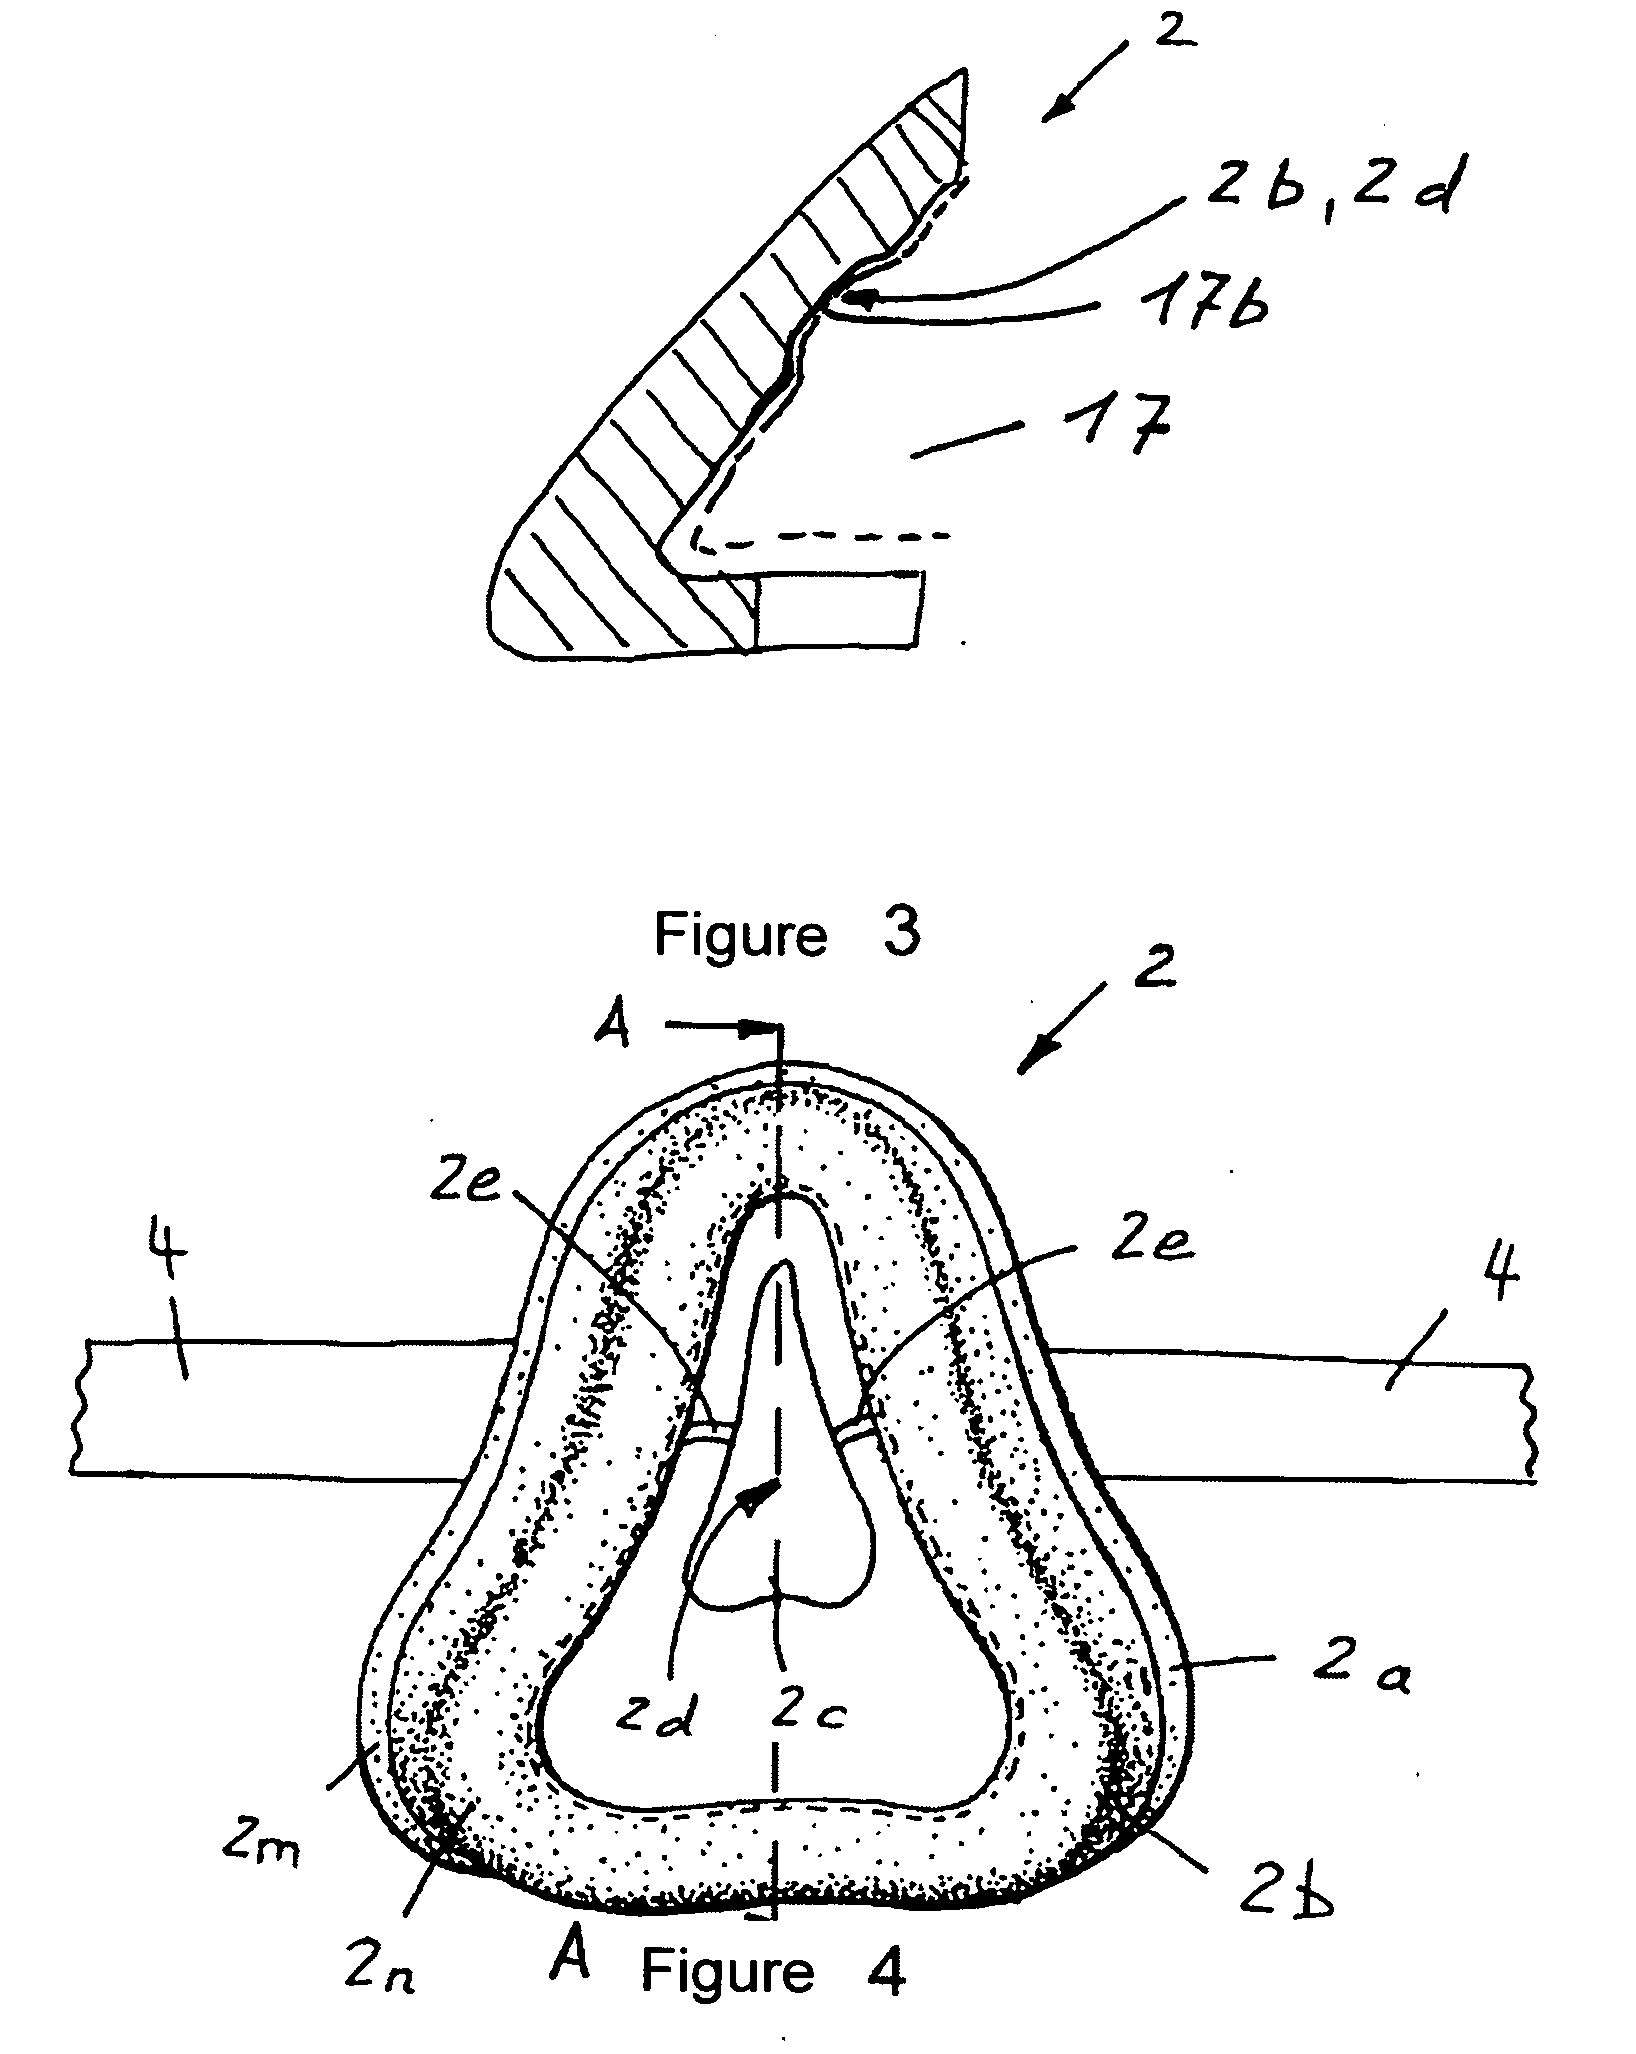 Device for reshaping bones